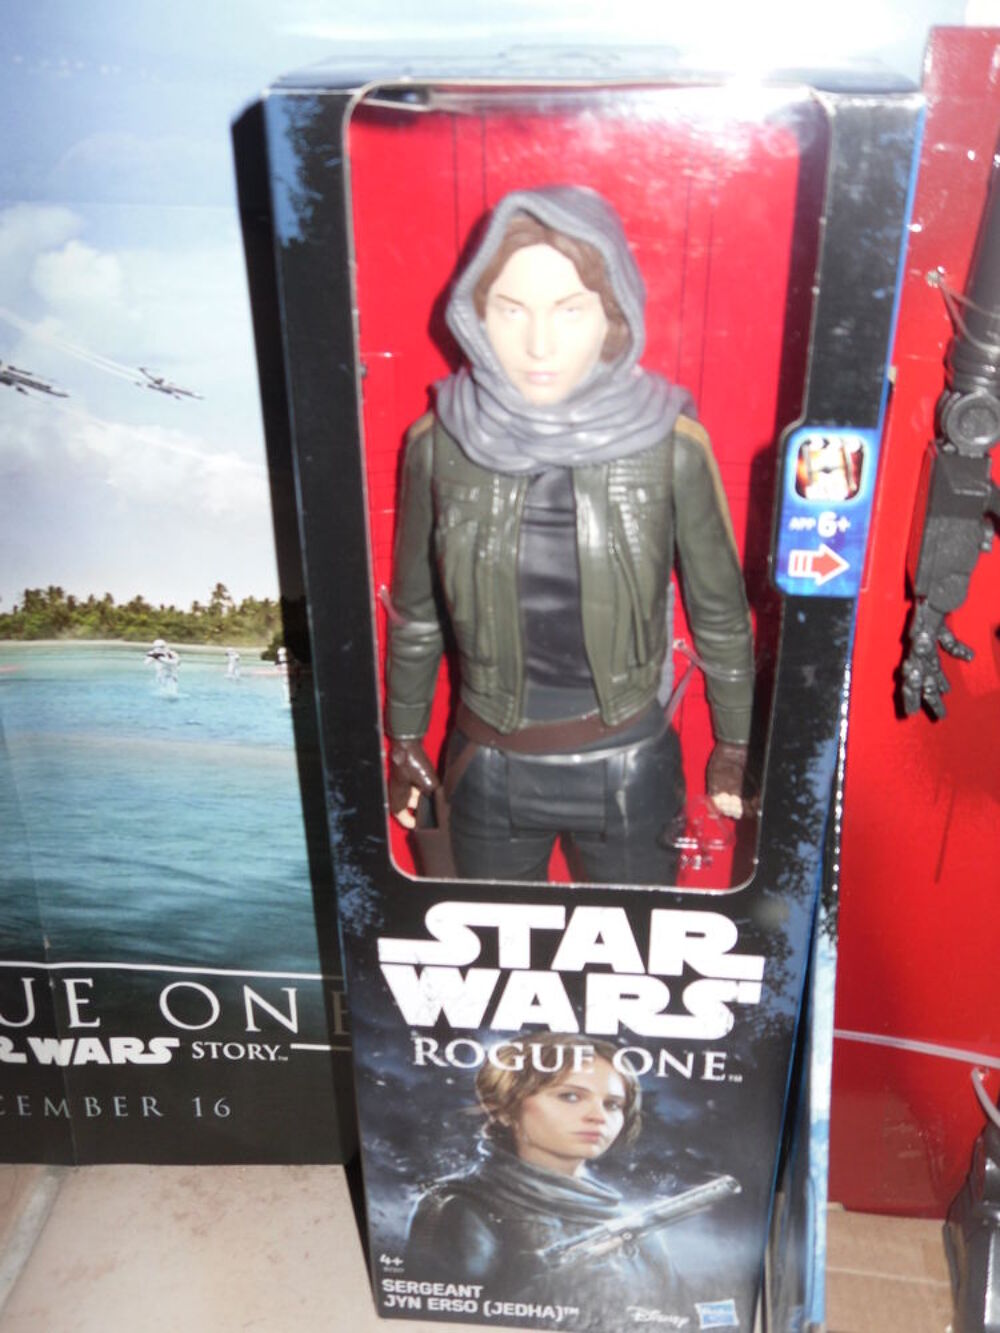 Star Wars Rogue one Sergent Jyn Erso 28 cm Neuf Jeux / jouets